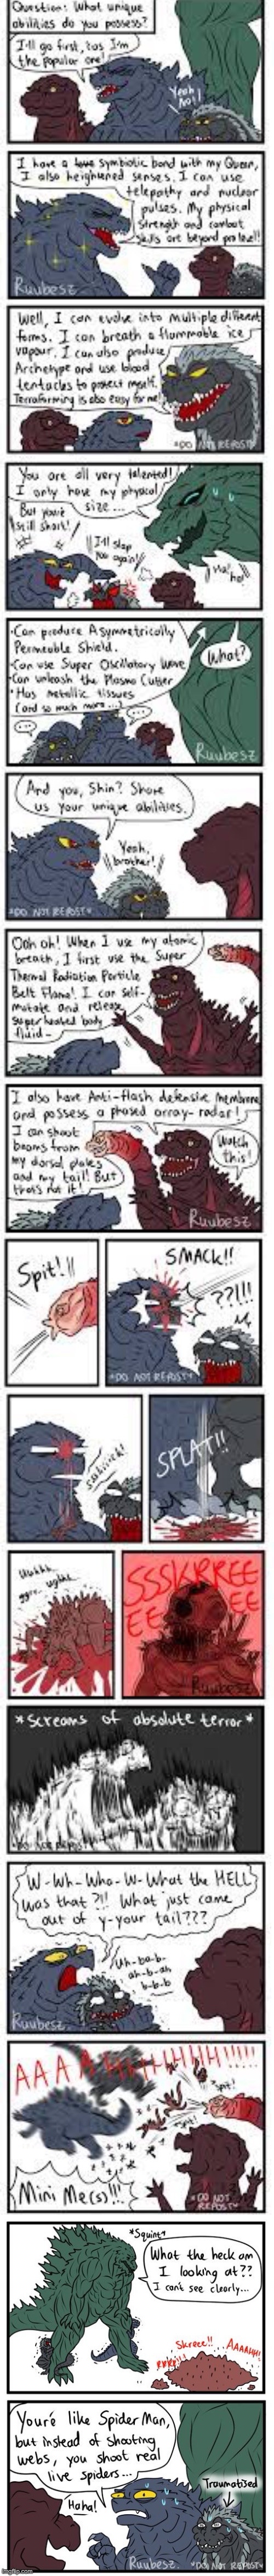 Sorry for low quality | image tagged in godzilla,comics/cartoons,comics | made w/ Imgflip meme maker